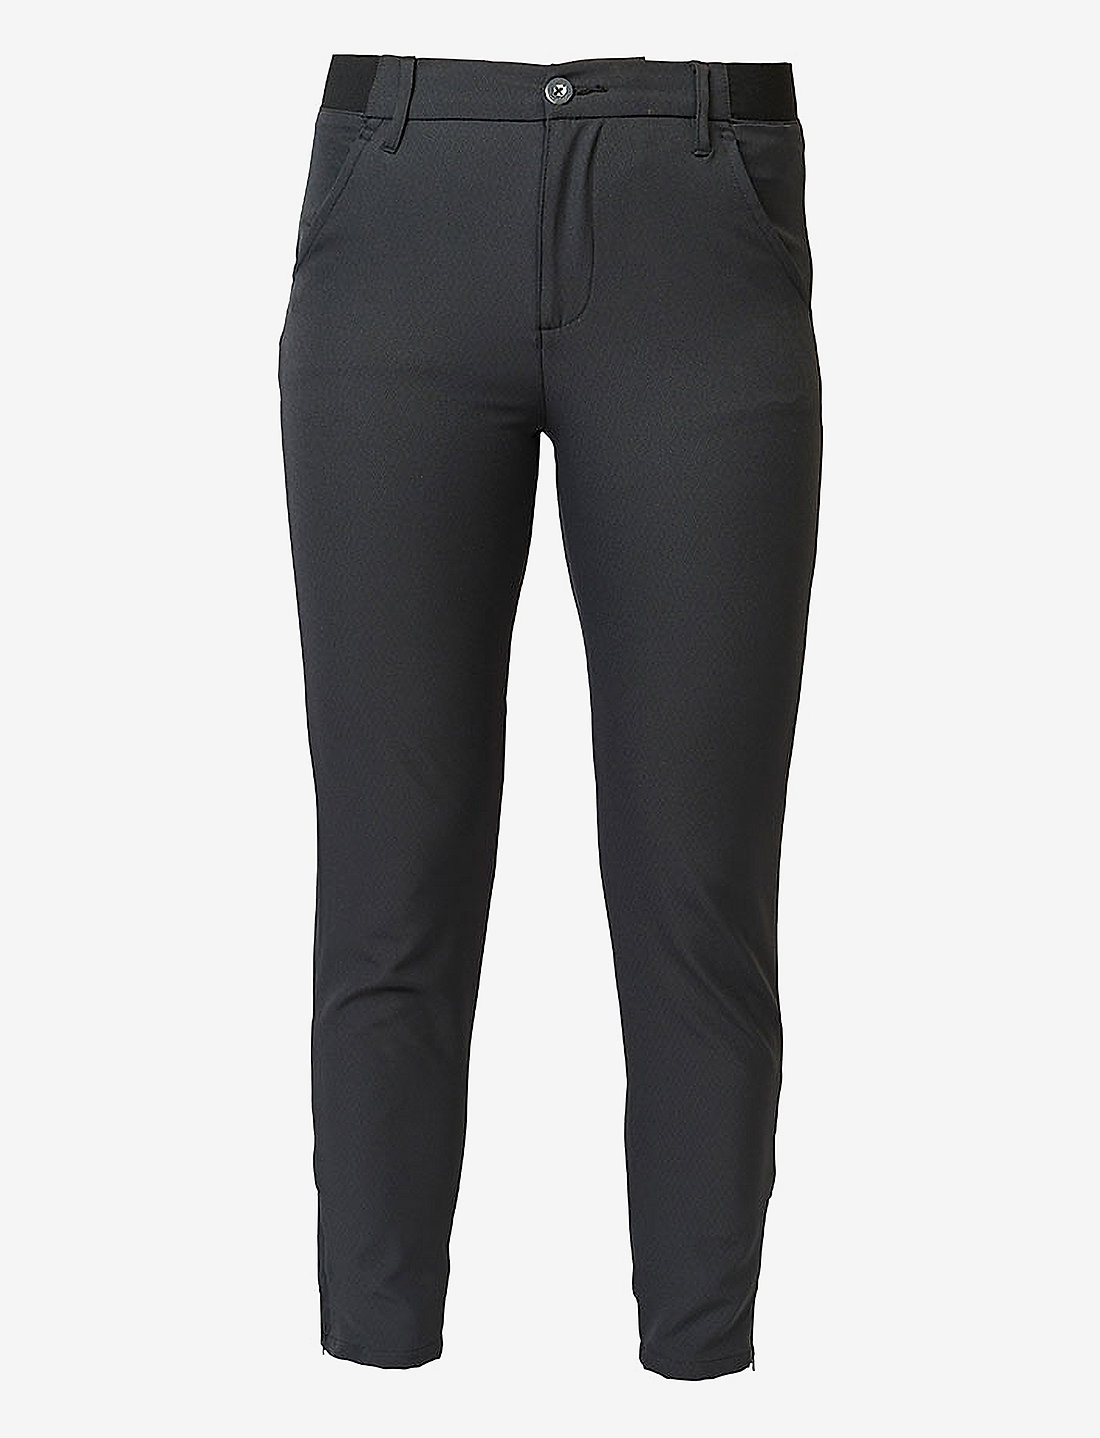 BACKTEE Ladies Sports Pants - Trousers